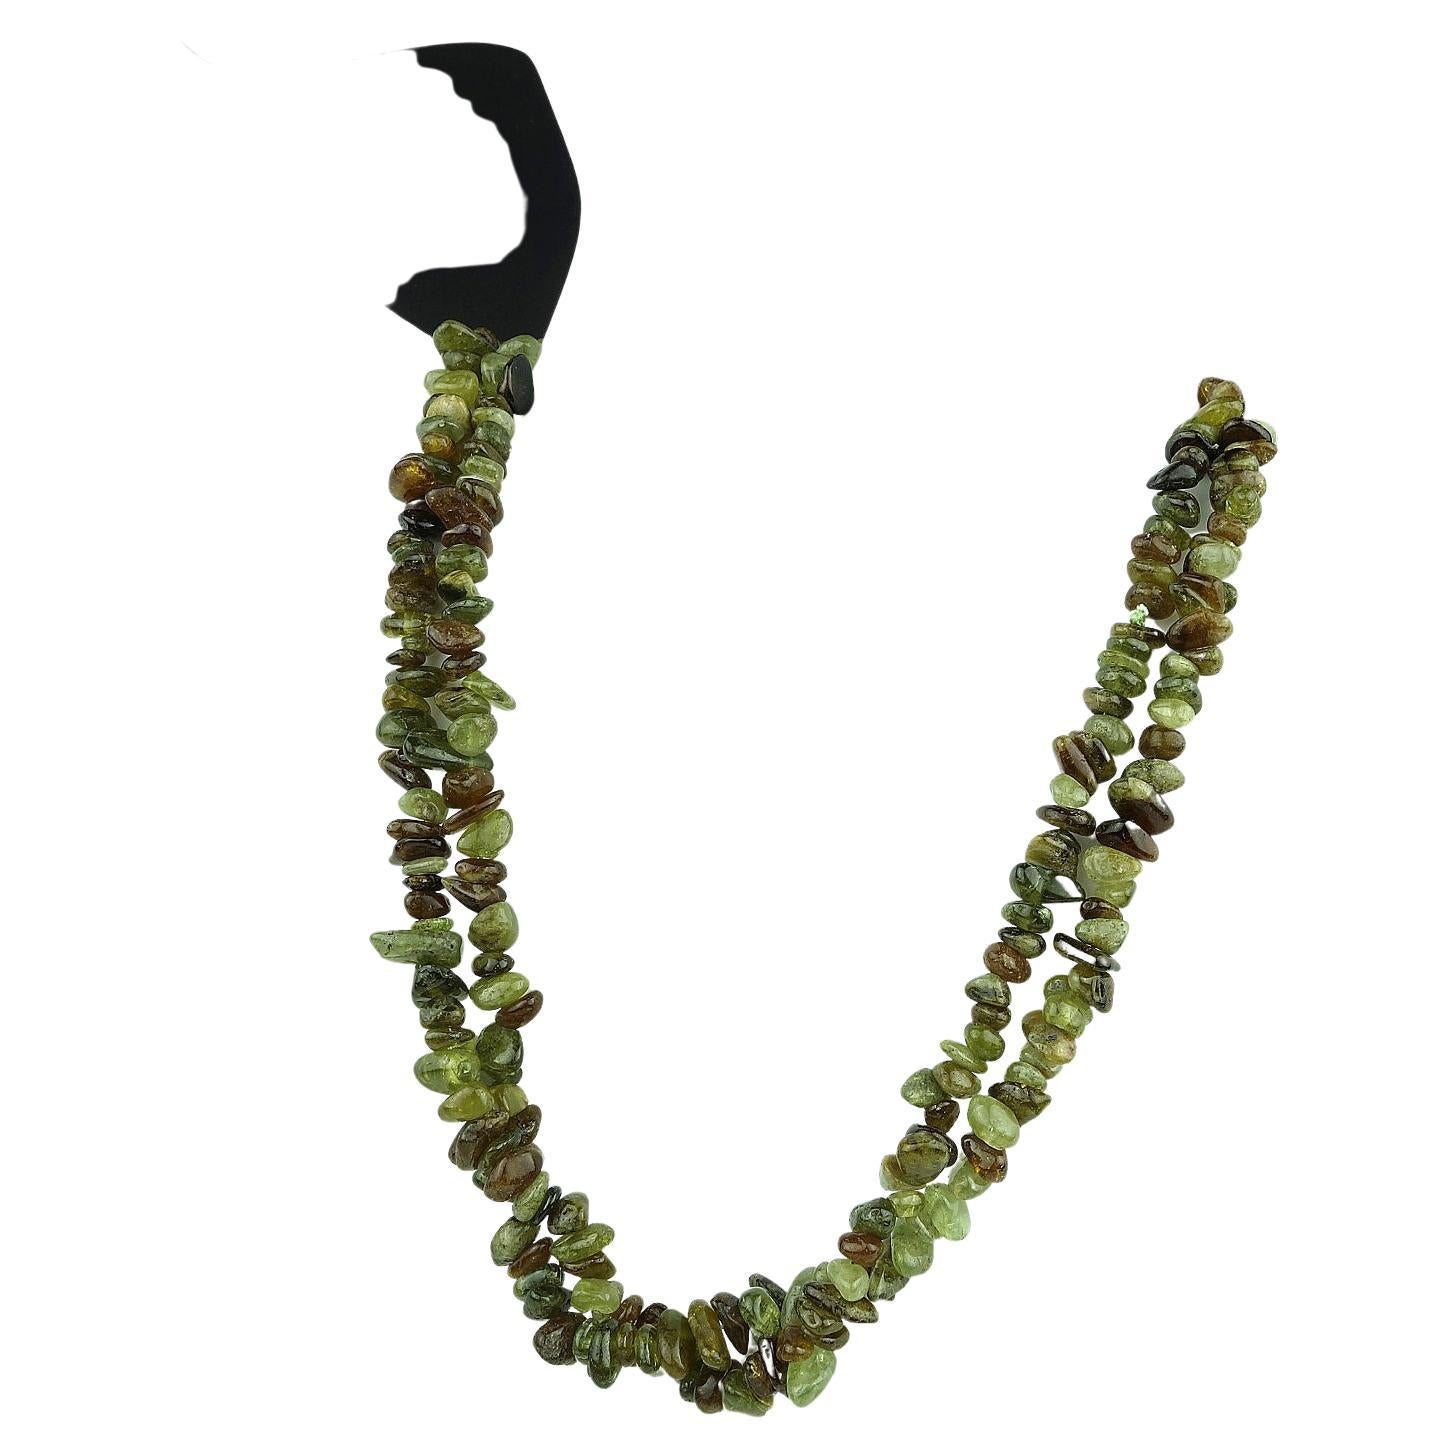 33 Inch continuous strand of high polished Green Garnet chip necklace. This unique necklace comes from one of our favorite suppliers in Sao Paulo. It is so versatile, wear it long as one 33 inch strand. Or, double it and clip with either of the gold